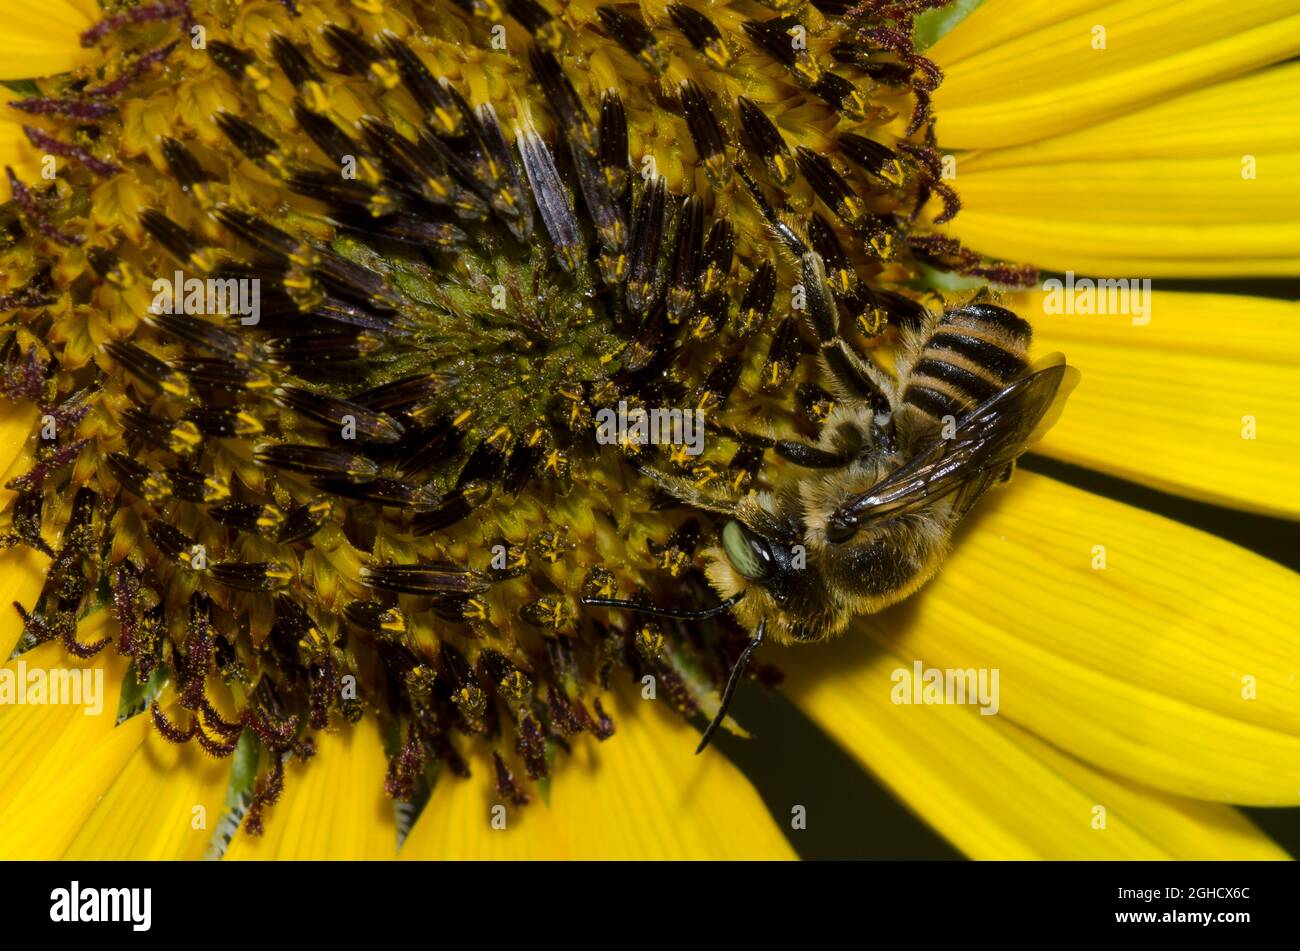 Leaf-cutter Bee, Megachile sp., foraging on Common Sunflower, Helianthus annuus Stock Photo